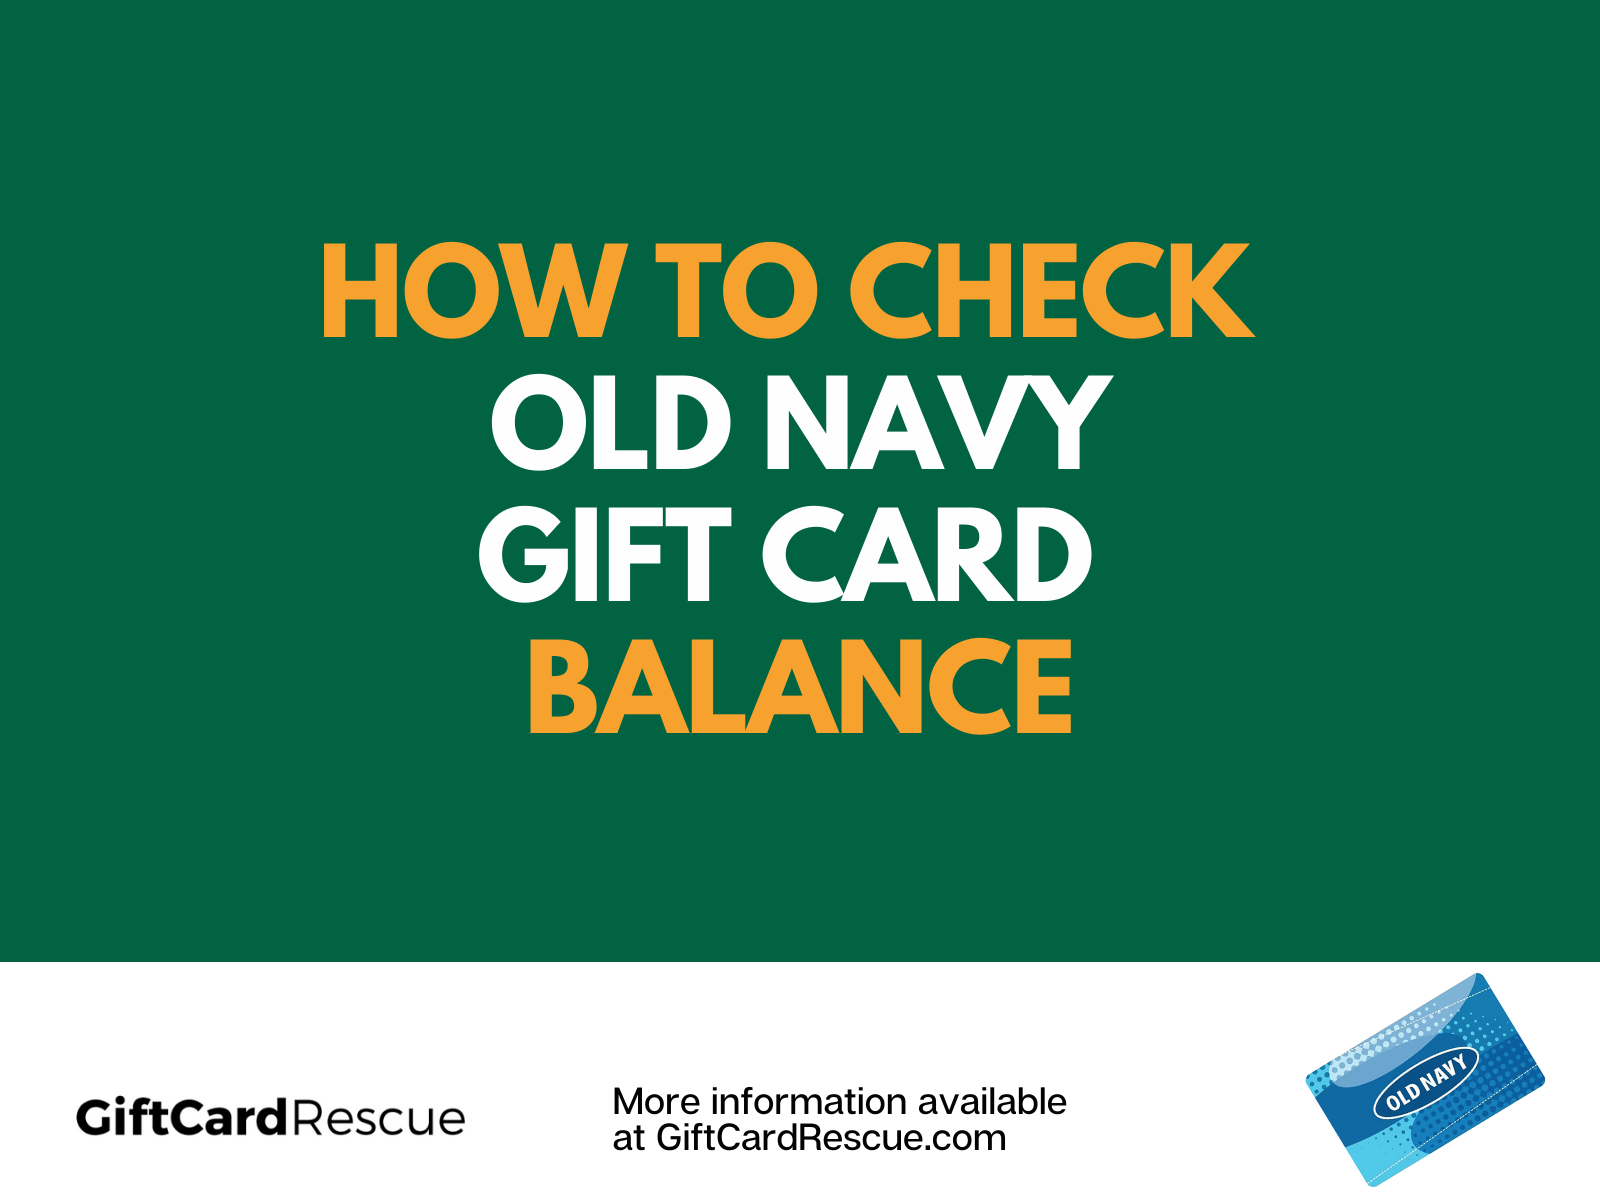 "How to Check Old Navy Gift Card Balance"